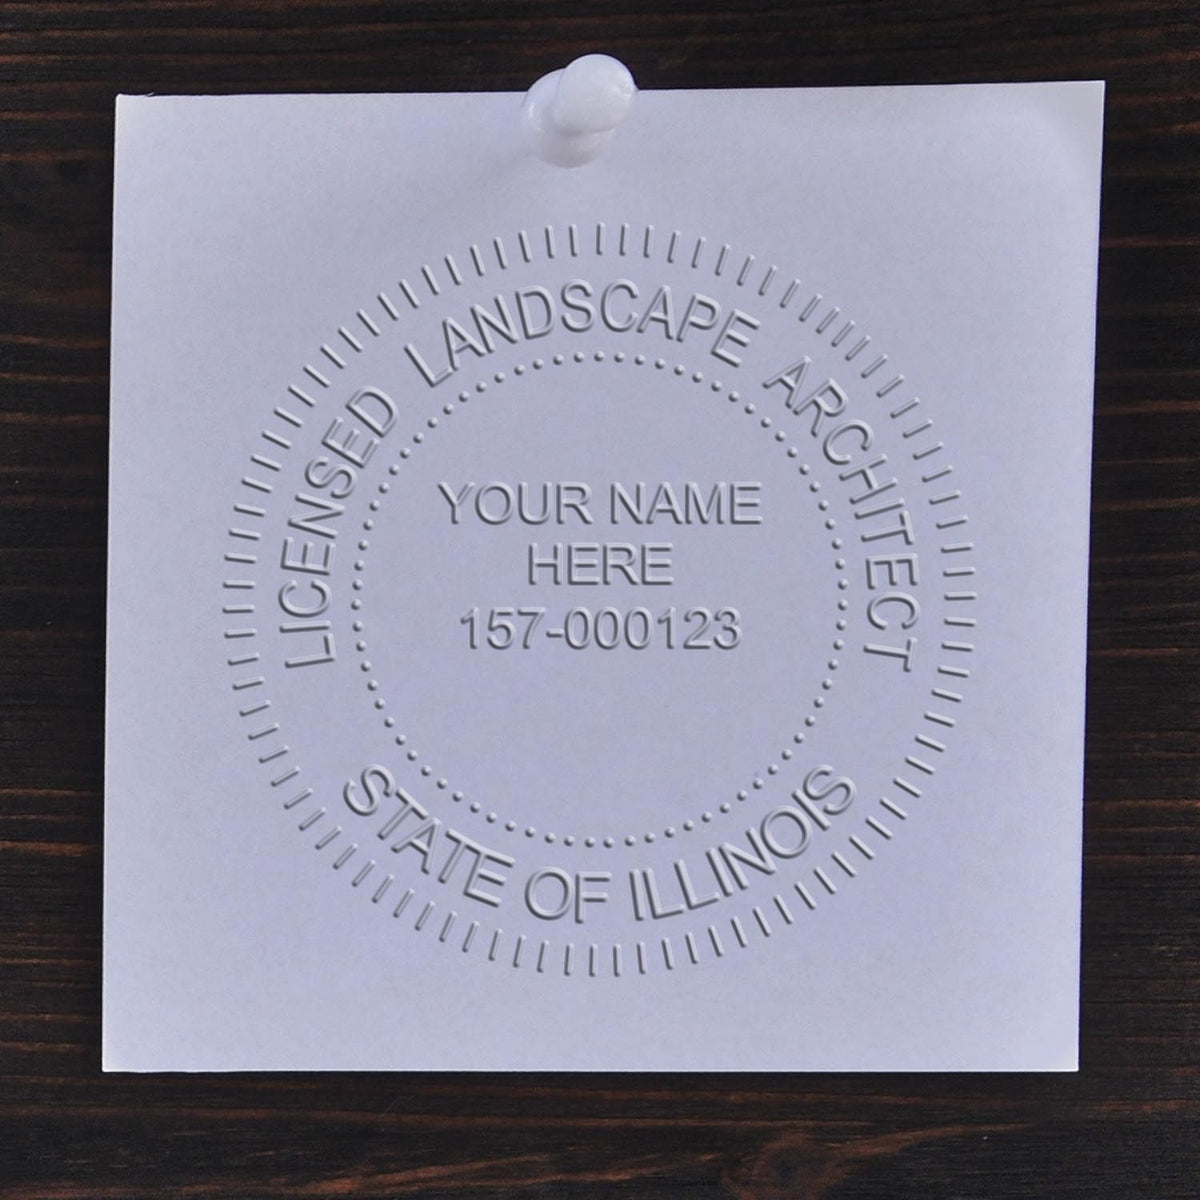 A photograph of the Hybrid Illinois Landscape Architect Seal stamp impression reveals a vivid, professional image of the on paper.